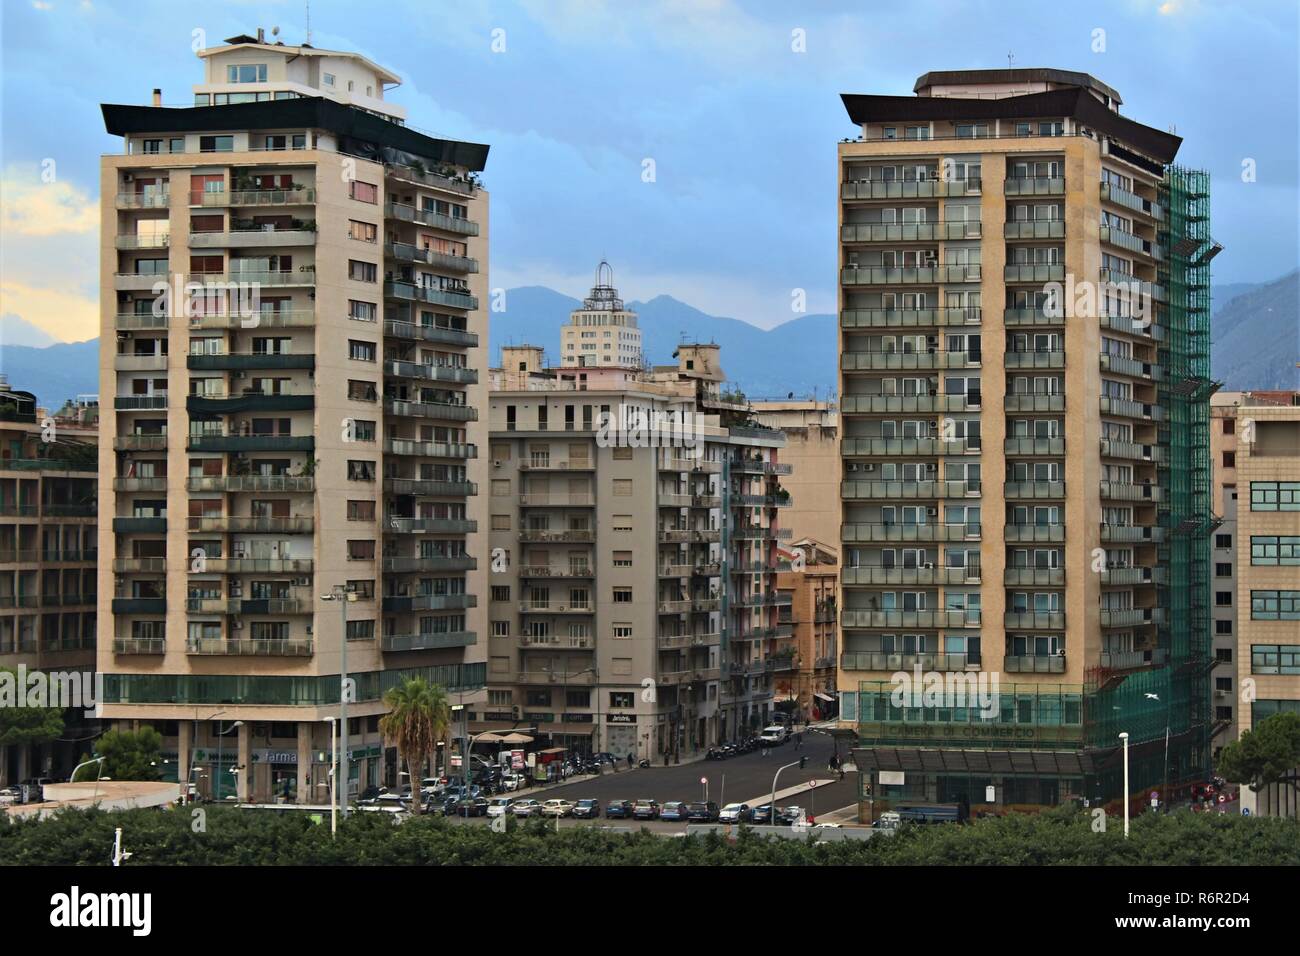 Palermo, Sicily, Italy - October 22nd 2018: A close up of the two high-rise tower blocks that dominate the view of the Palermo cityscape from the port Stock Photo